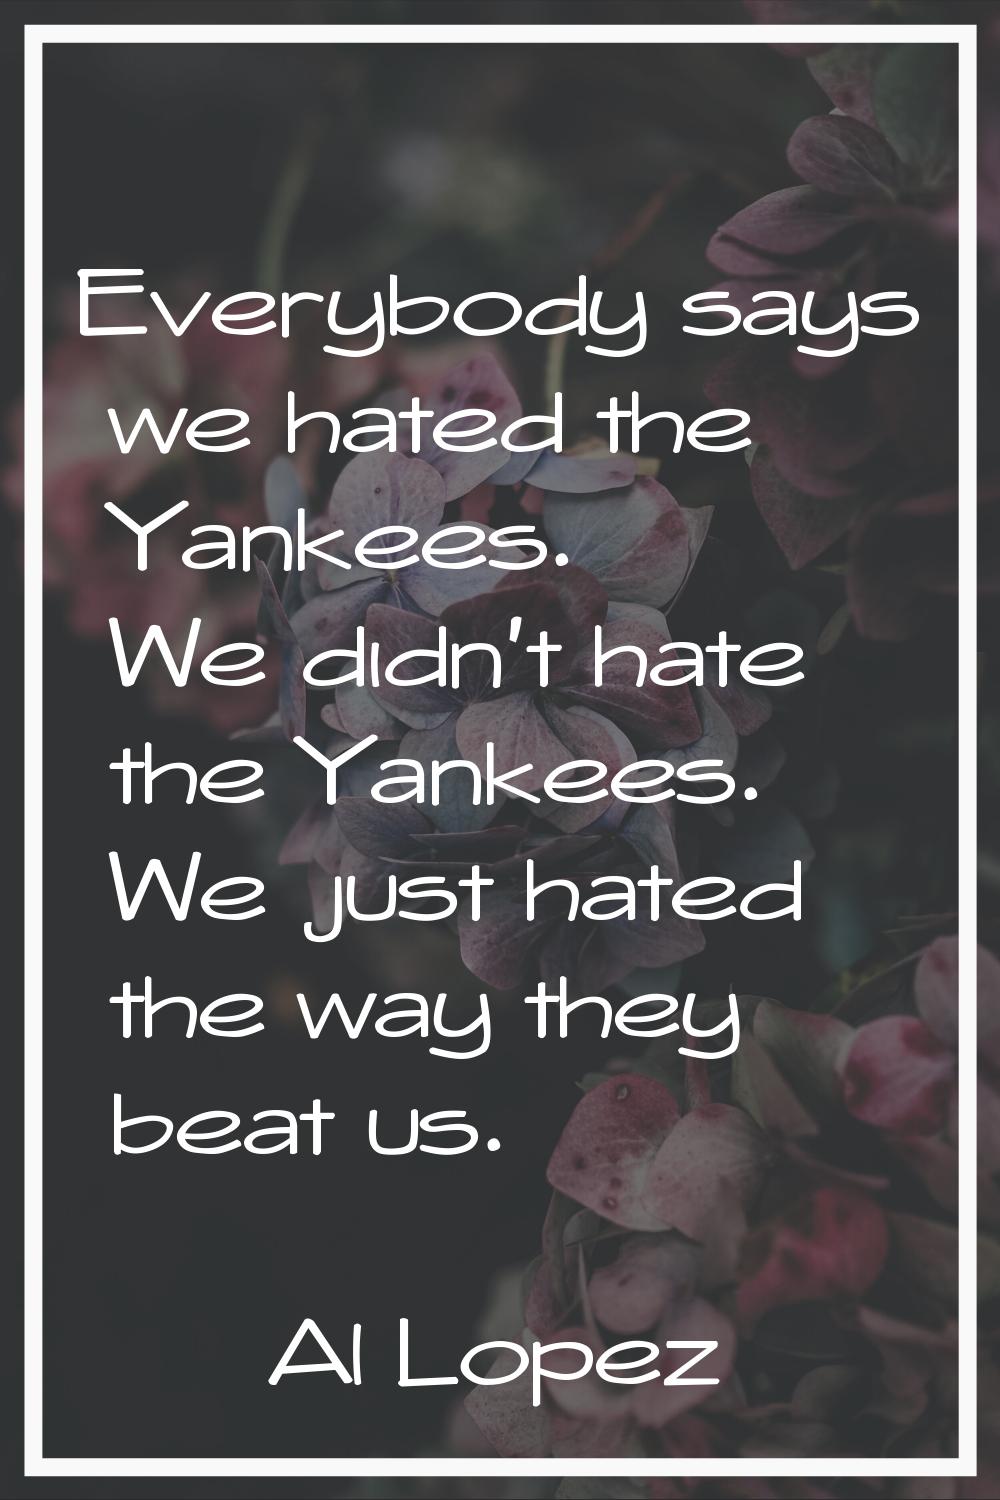 Everybody says we hated the Yankees. We didn't hate the Yankees. We just hated the way they beat us